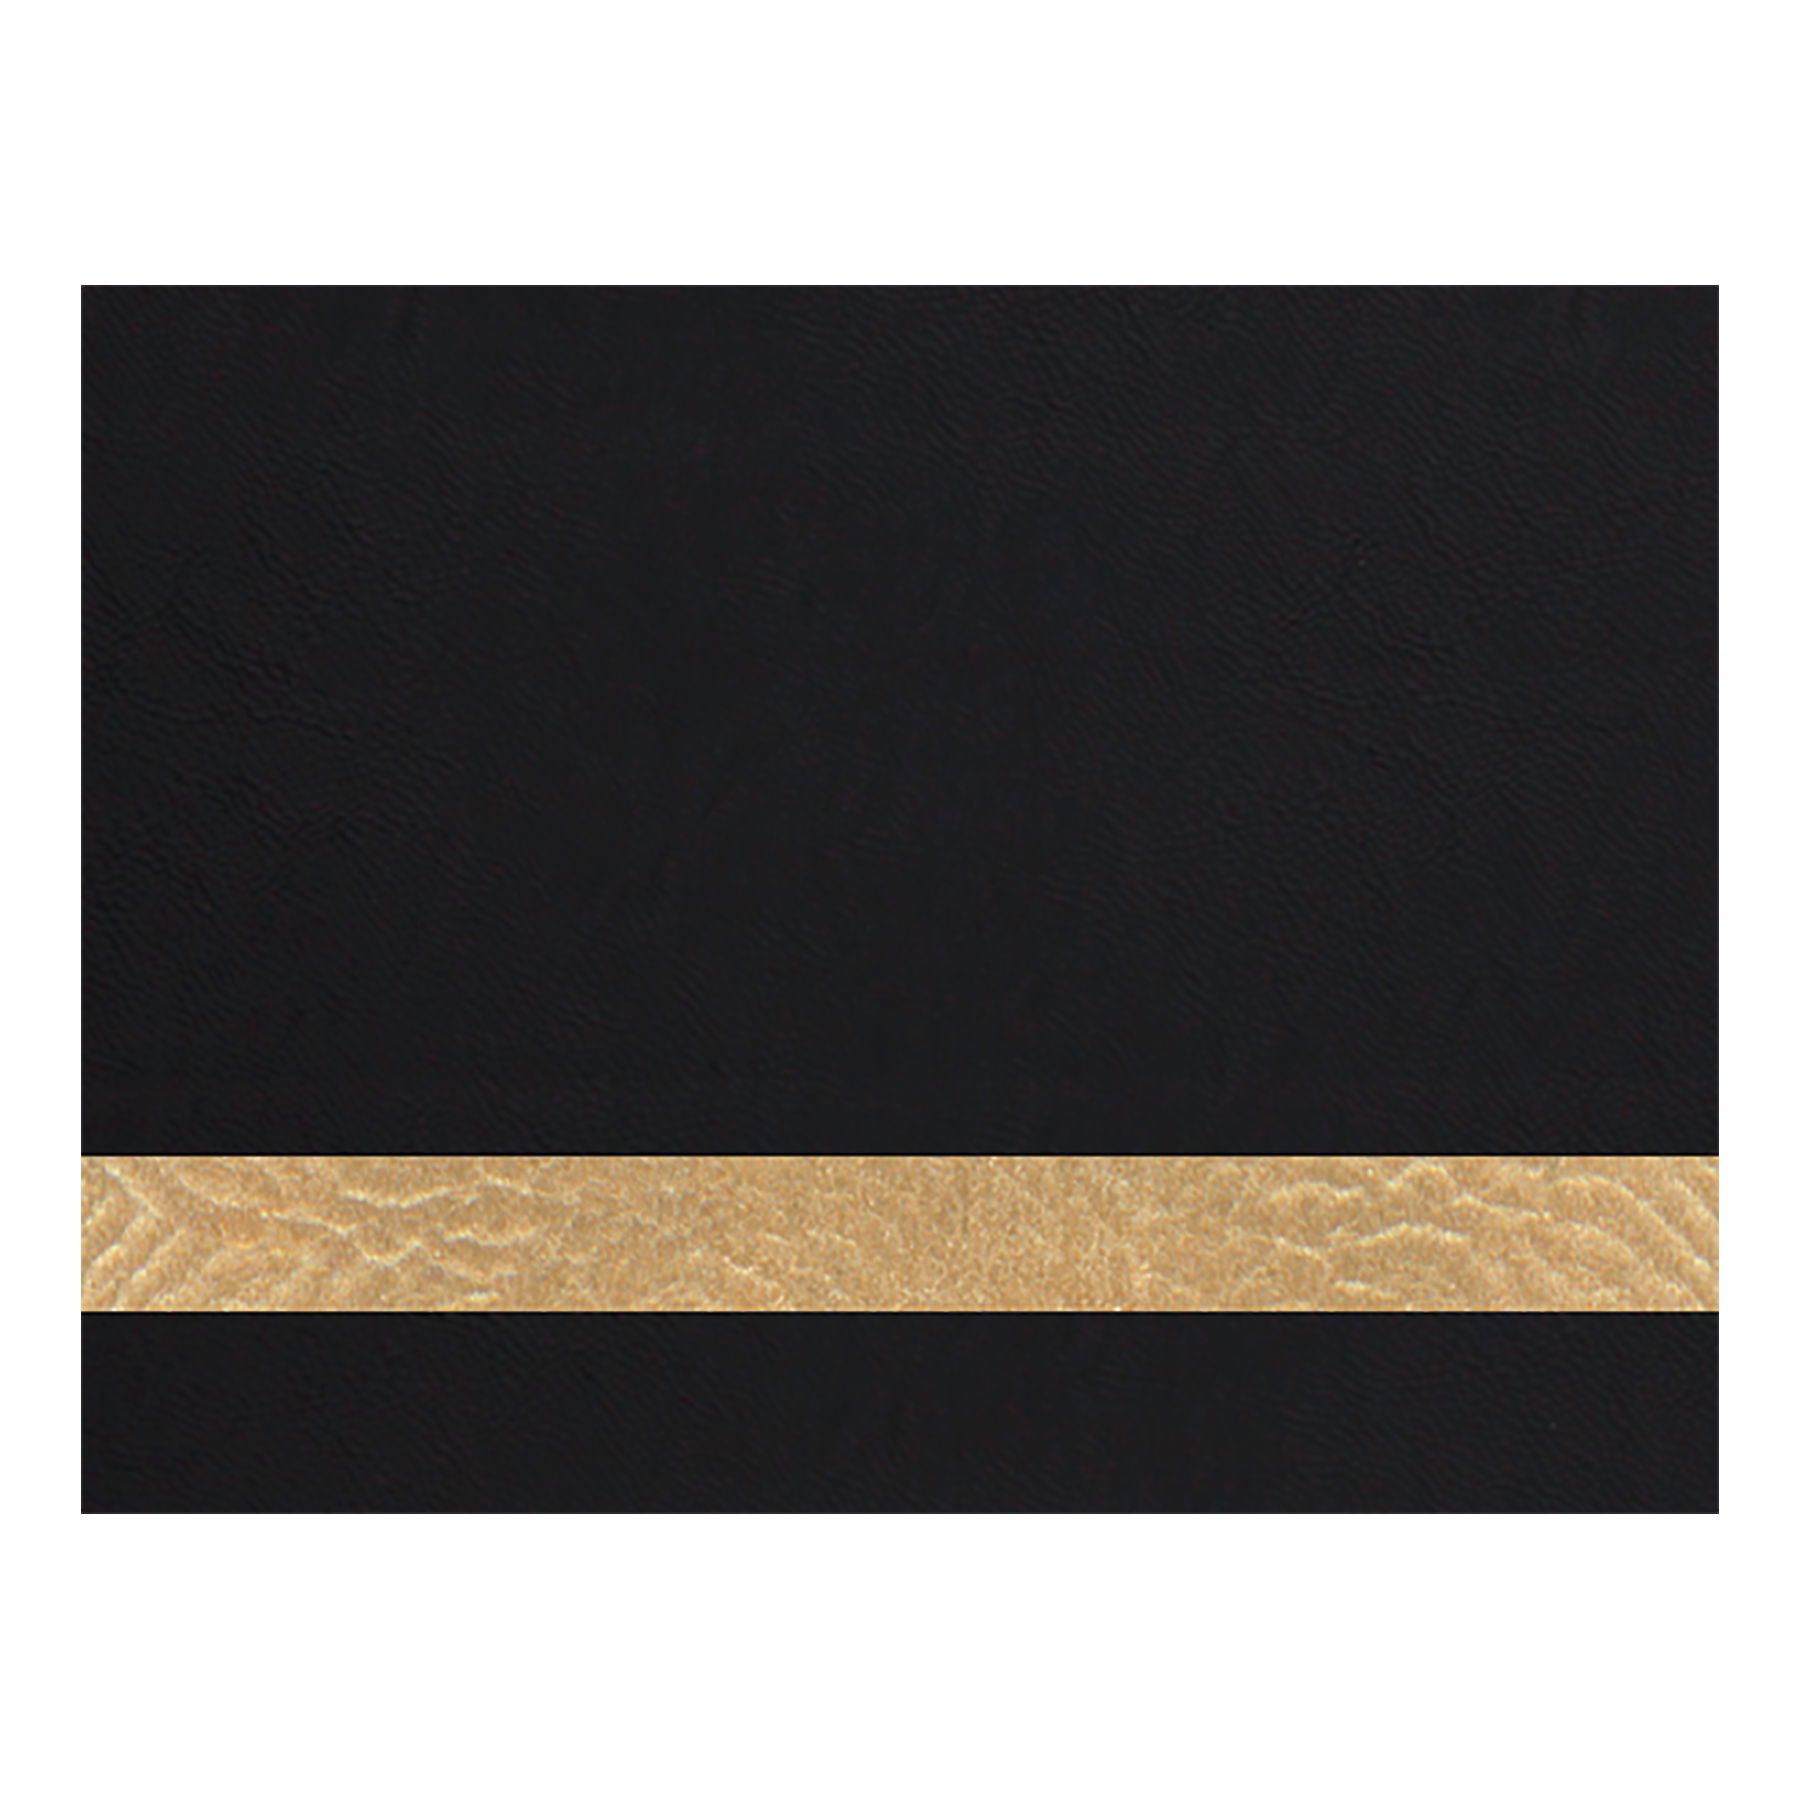 PRE-ORDER! Full Size Laserable Leatherette Sheet Stock, Boss Laser Engravers (Available Jan. 2022) Engraving Supplies Craftworks NW LS-1630 (29" x 15") Black/Gold 